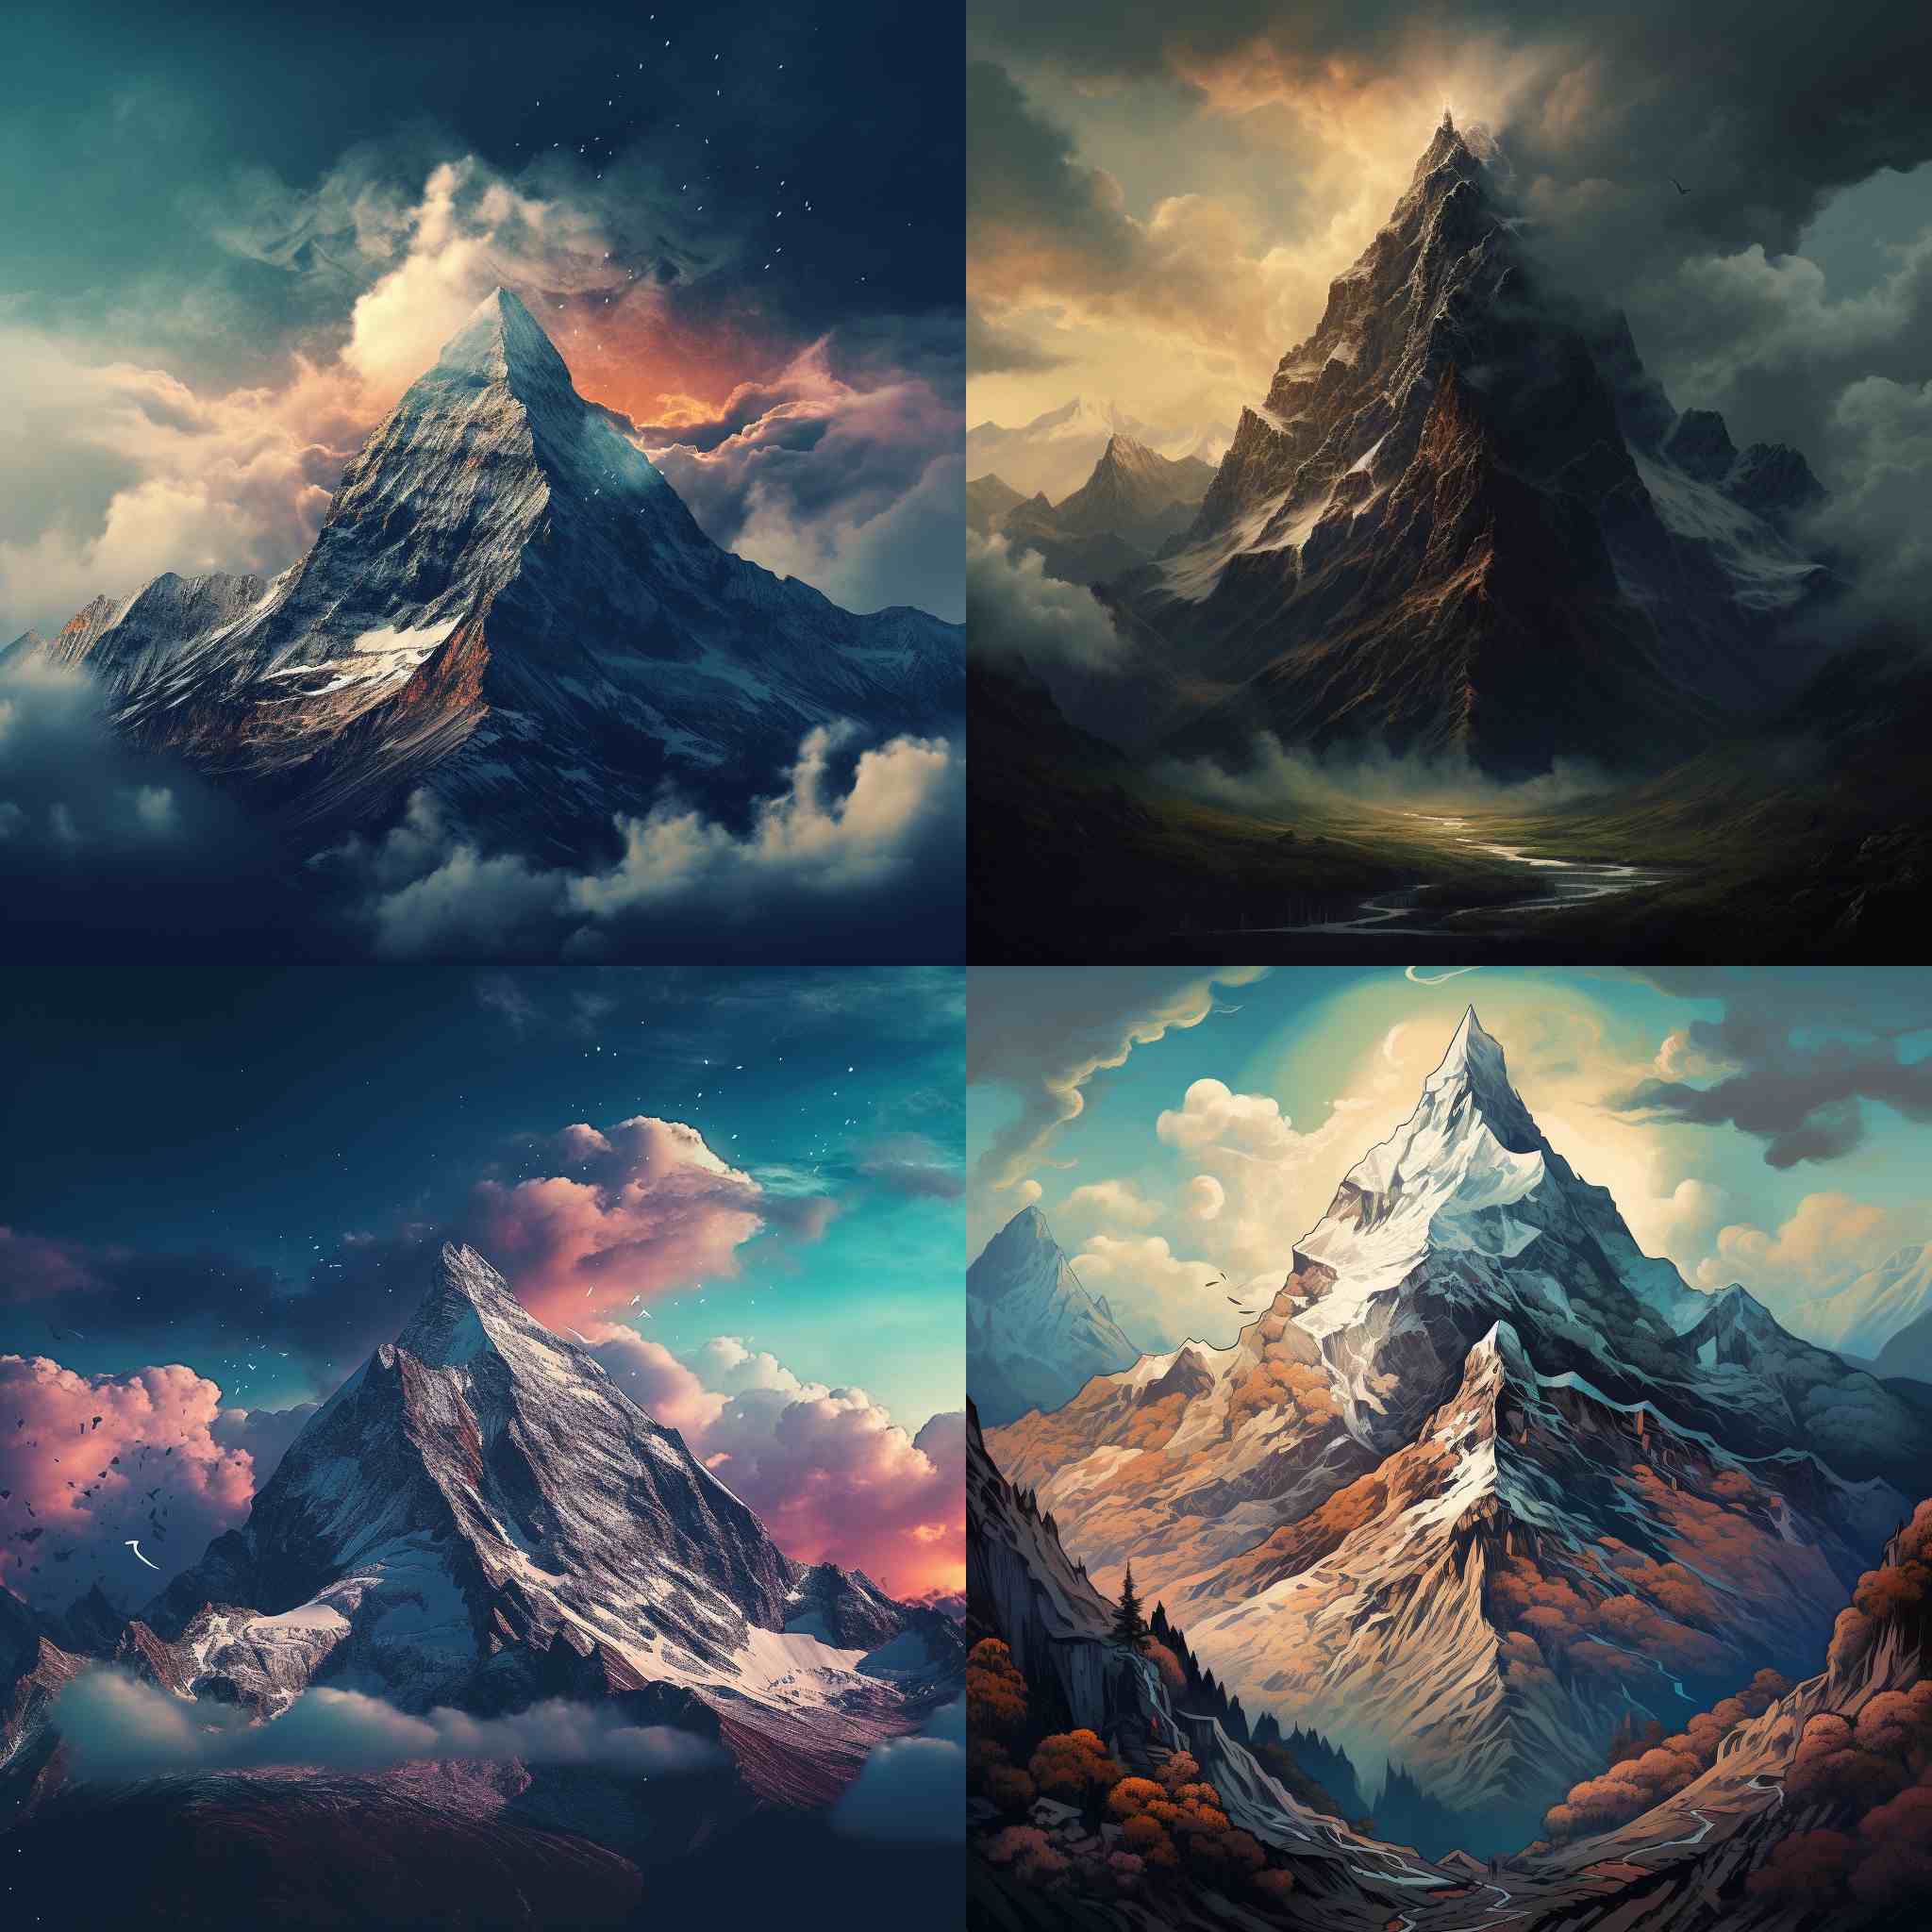 4 images of mountains in a 2x2 grid generated by Midjourney